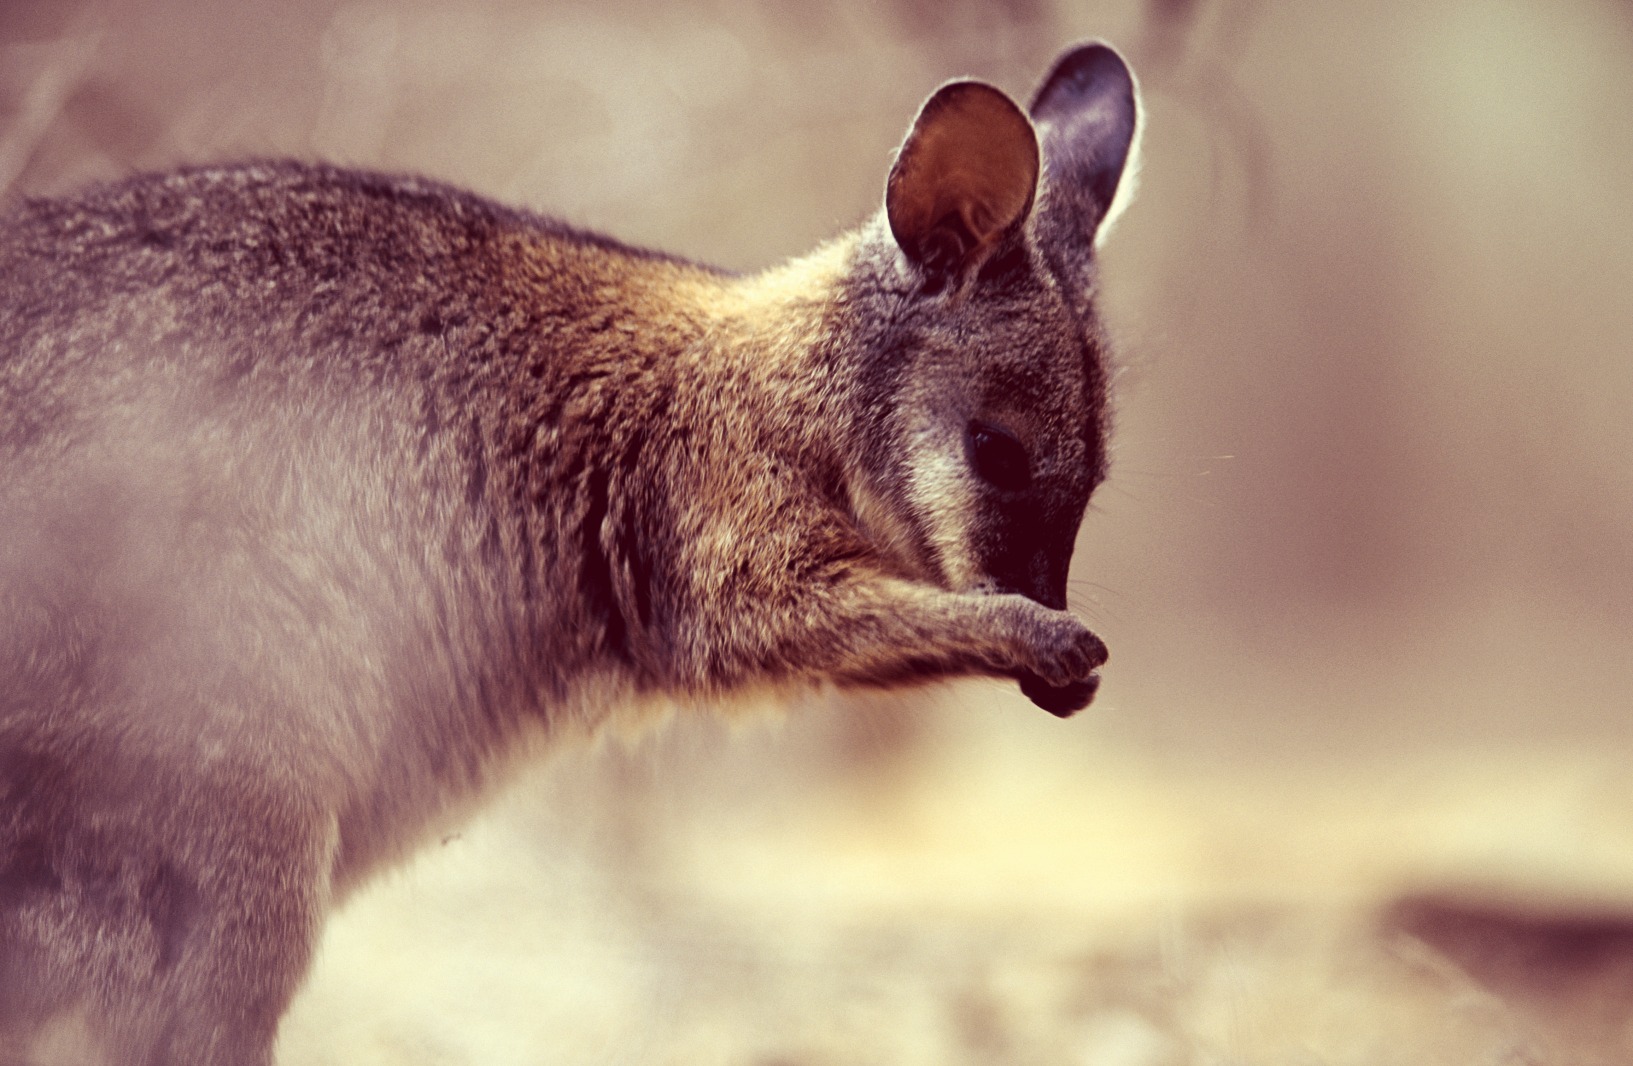 Kangaroo Island tourism operators can access images from the industry portal and do their own content marketing